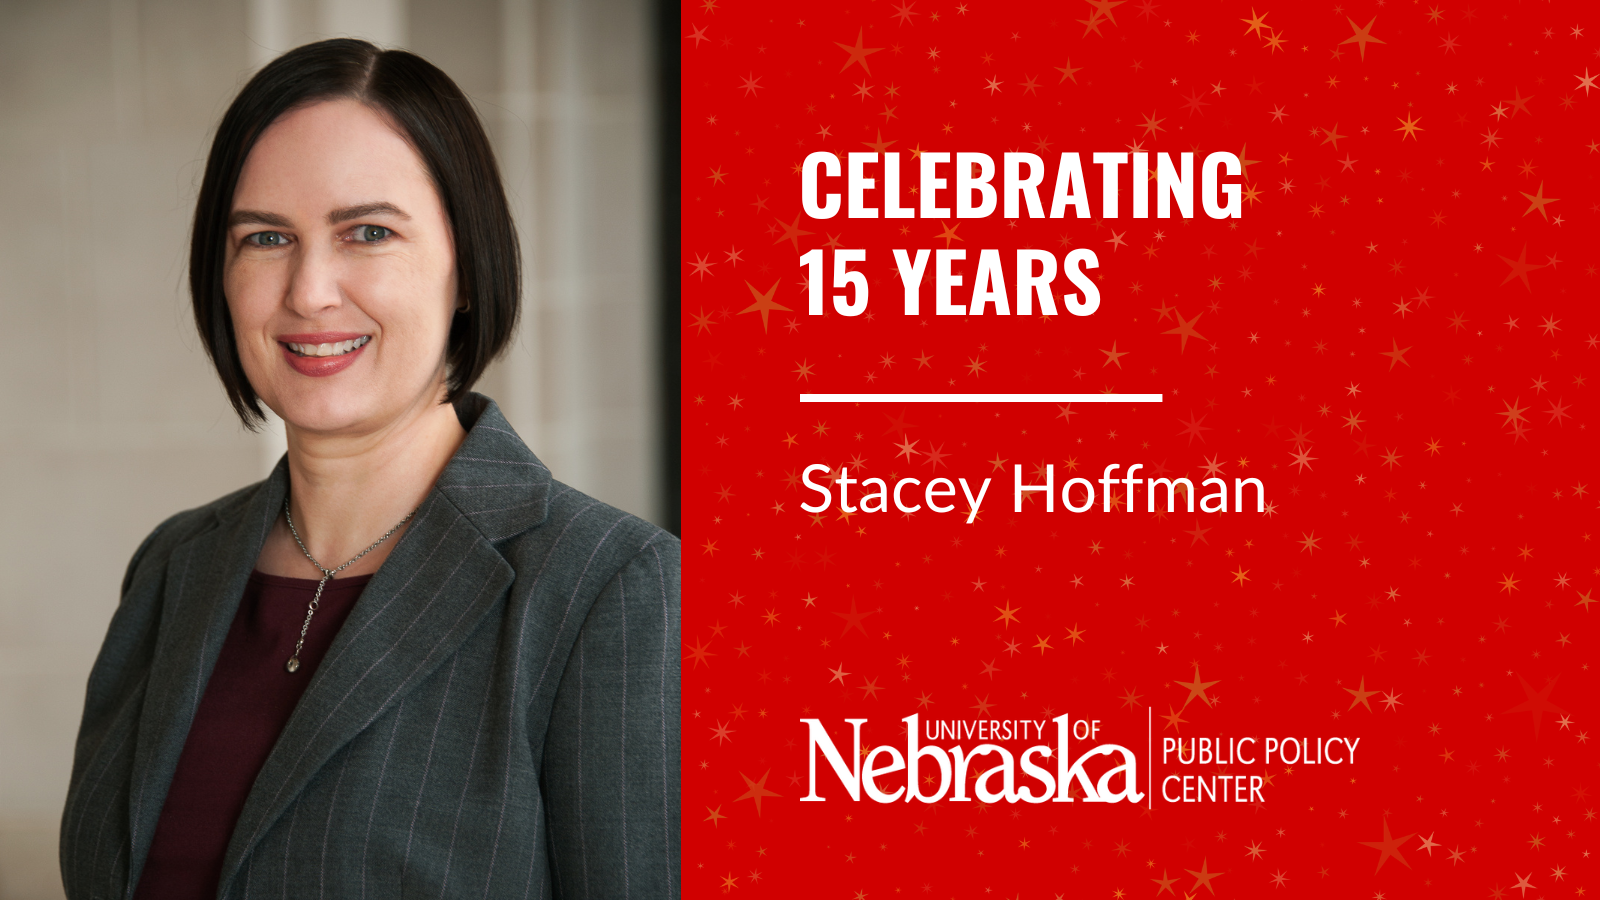 Stacey Hoffman celebrates 15 years